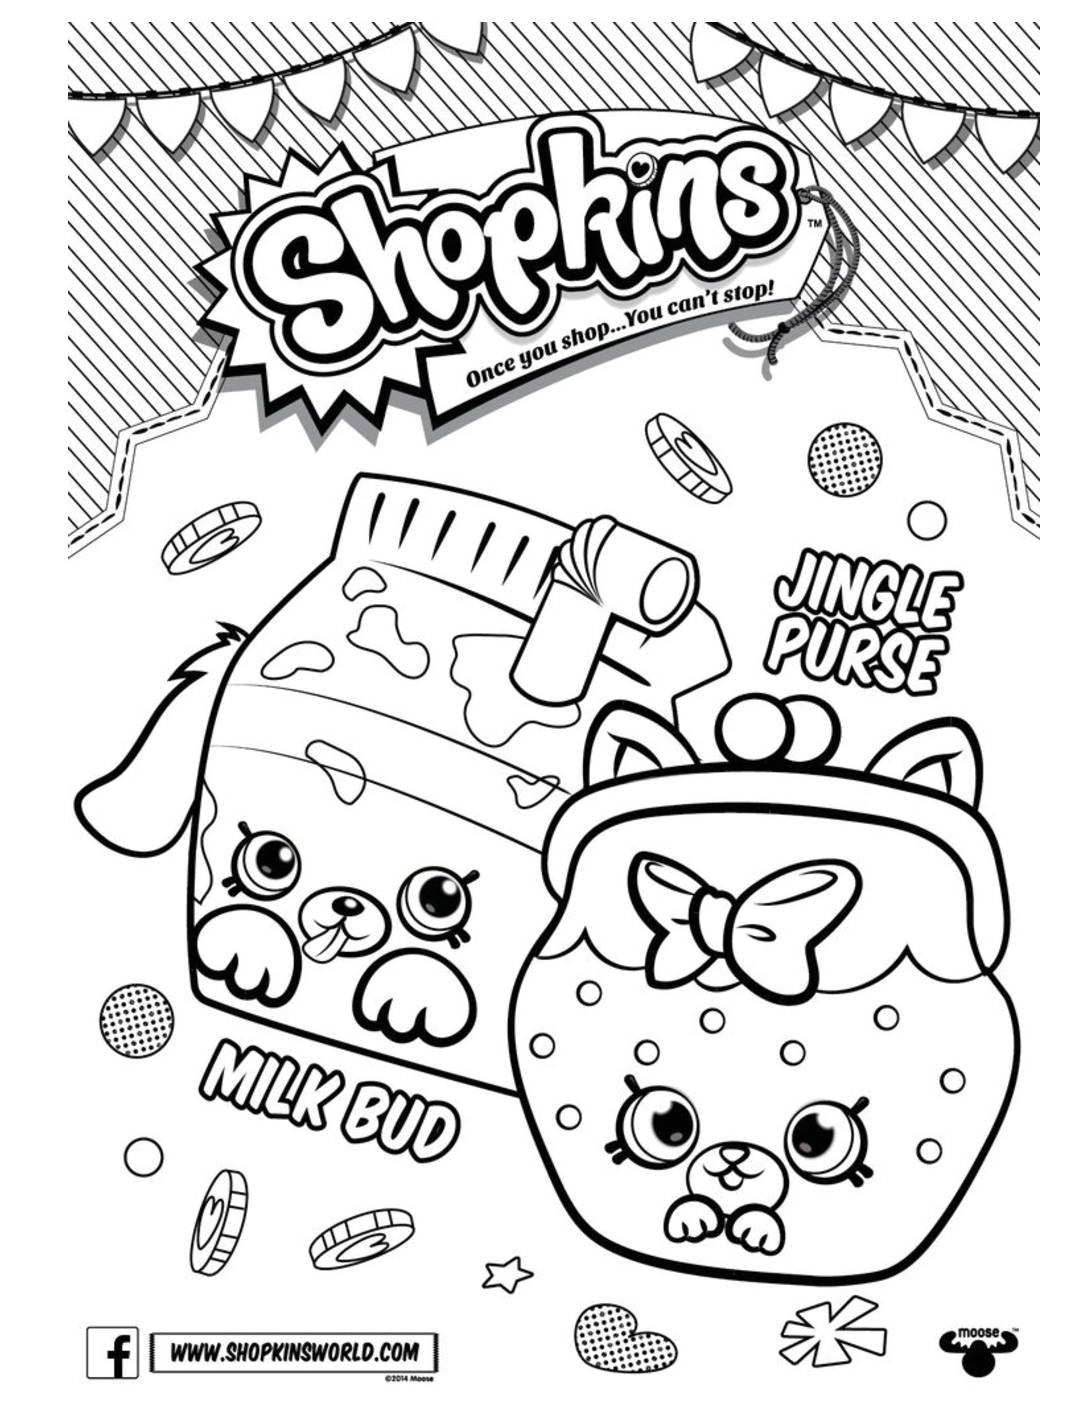 Shopkins Coloring Page 5